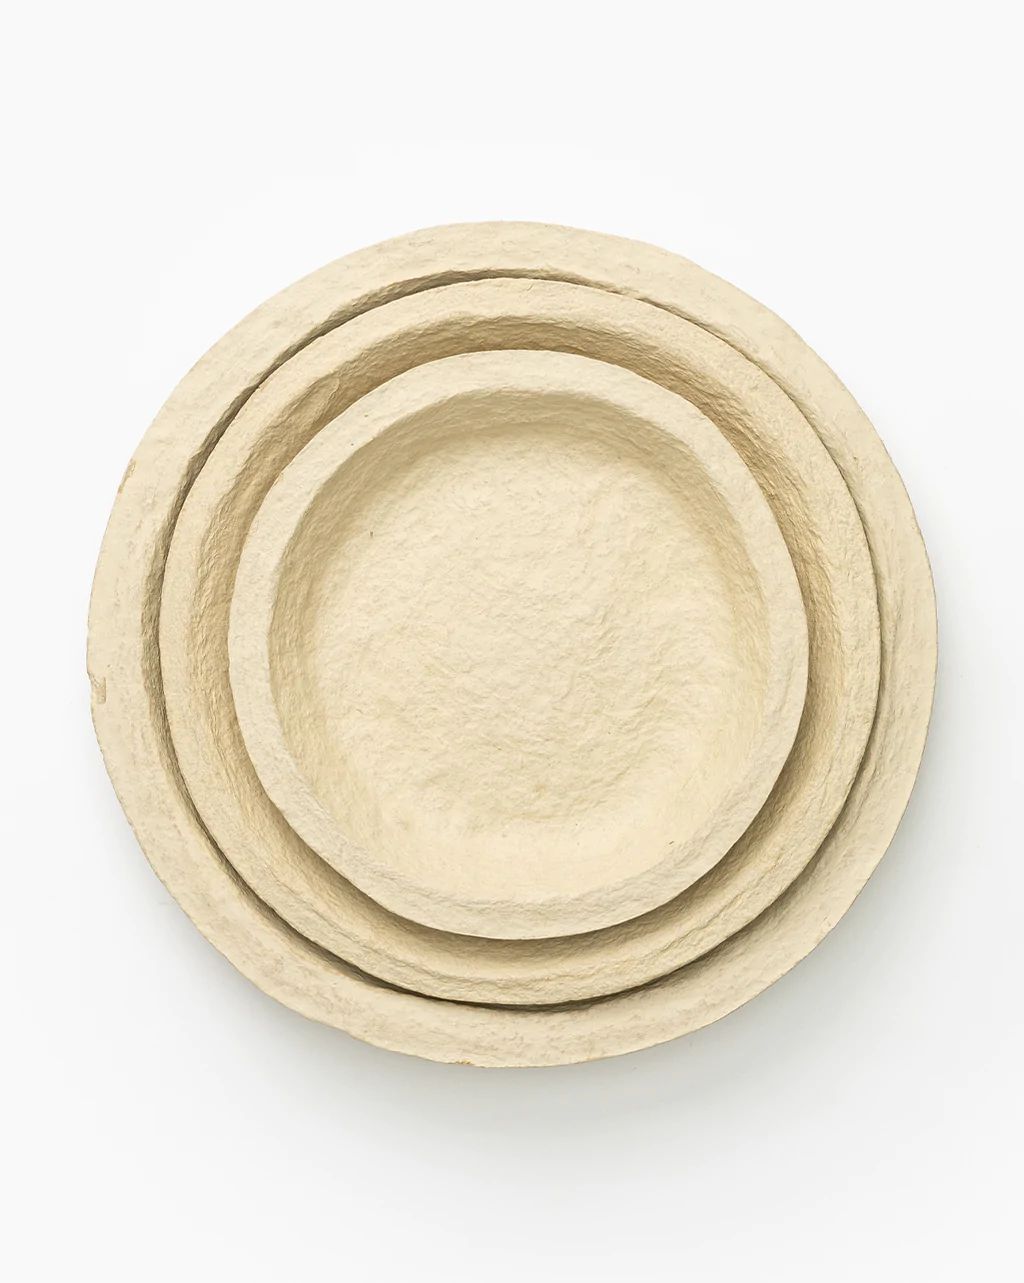 Paper Mache Round Tray | McGee & Co.